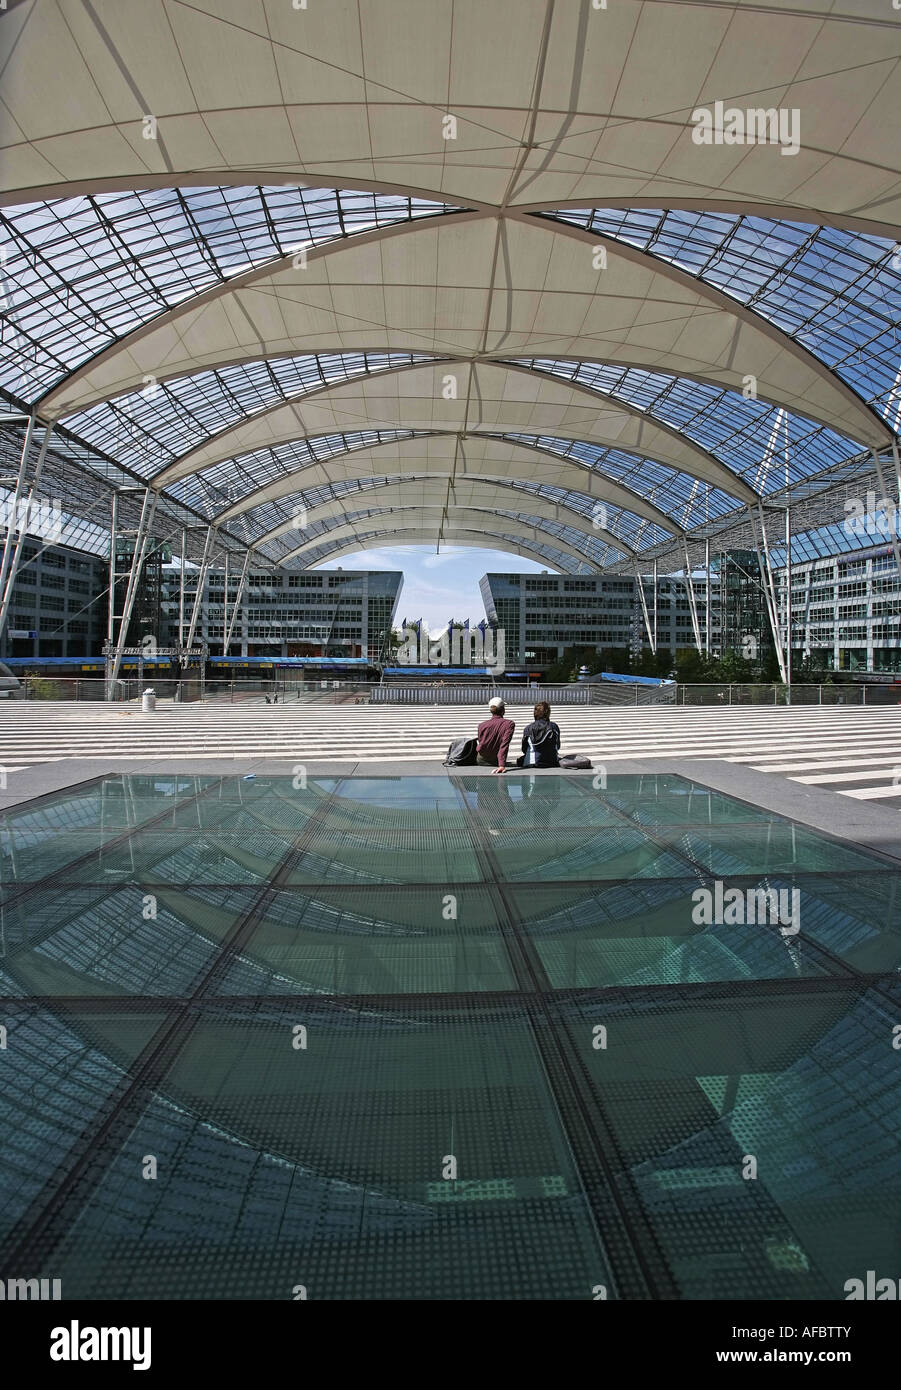 Illustration Airport: Travelers waiting at Munich Airport building with futuristic architecture and reflection Stock Photo